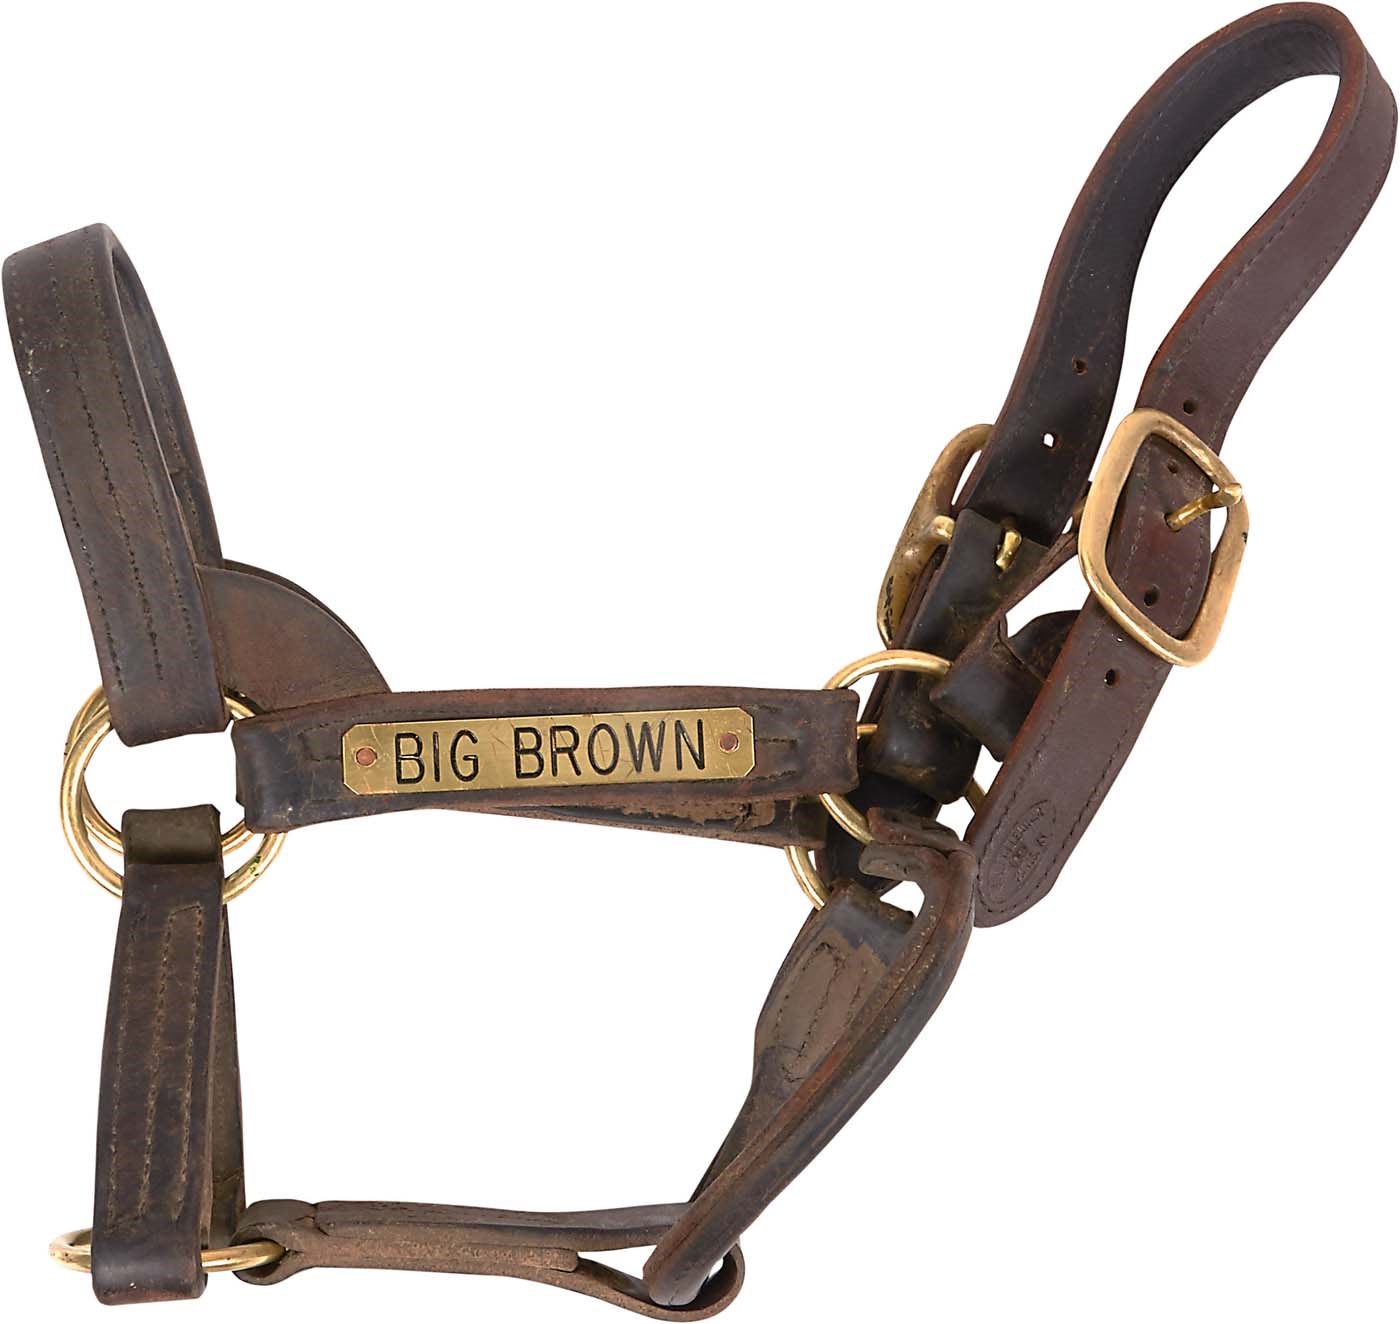 Horse Racing - Nice Collection of Horse Racing Halters w/Big Brown (4)